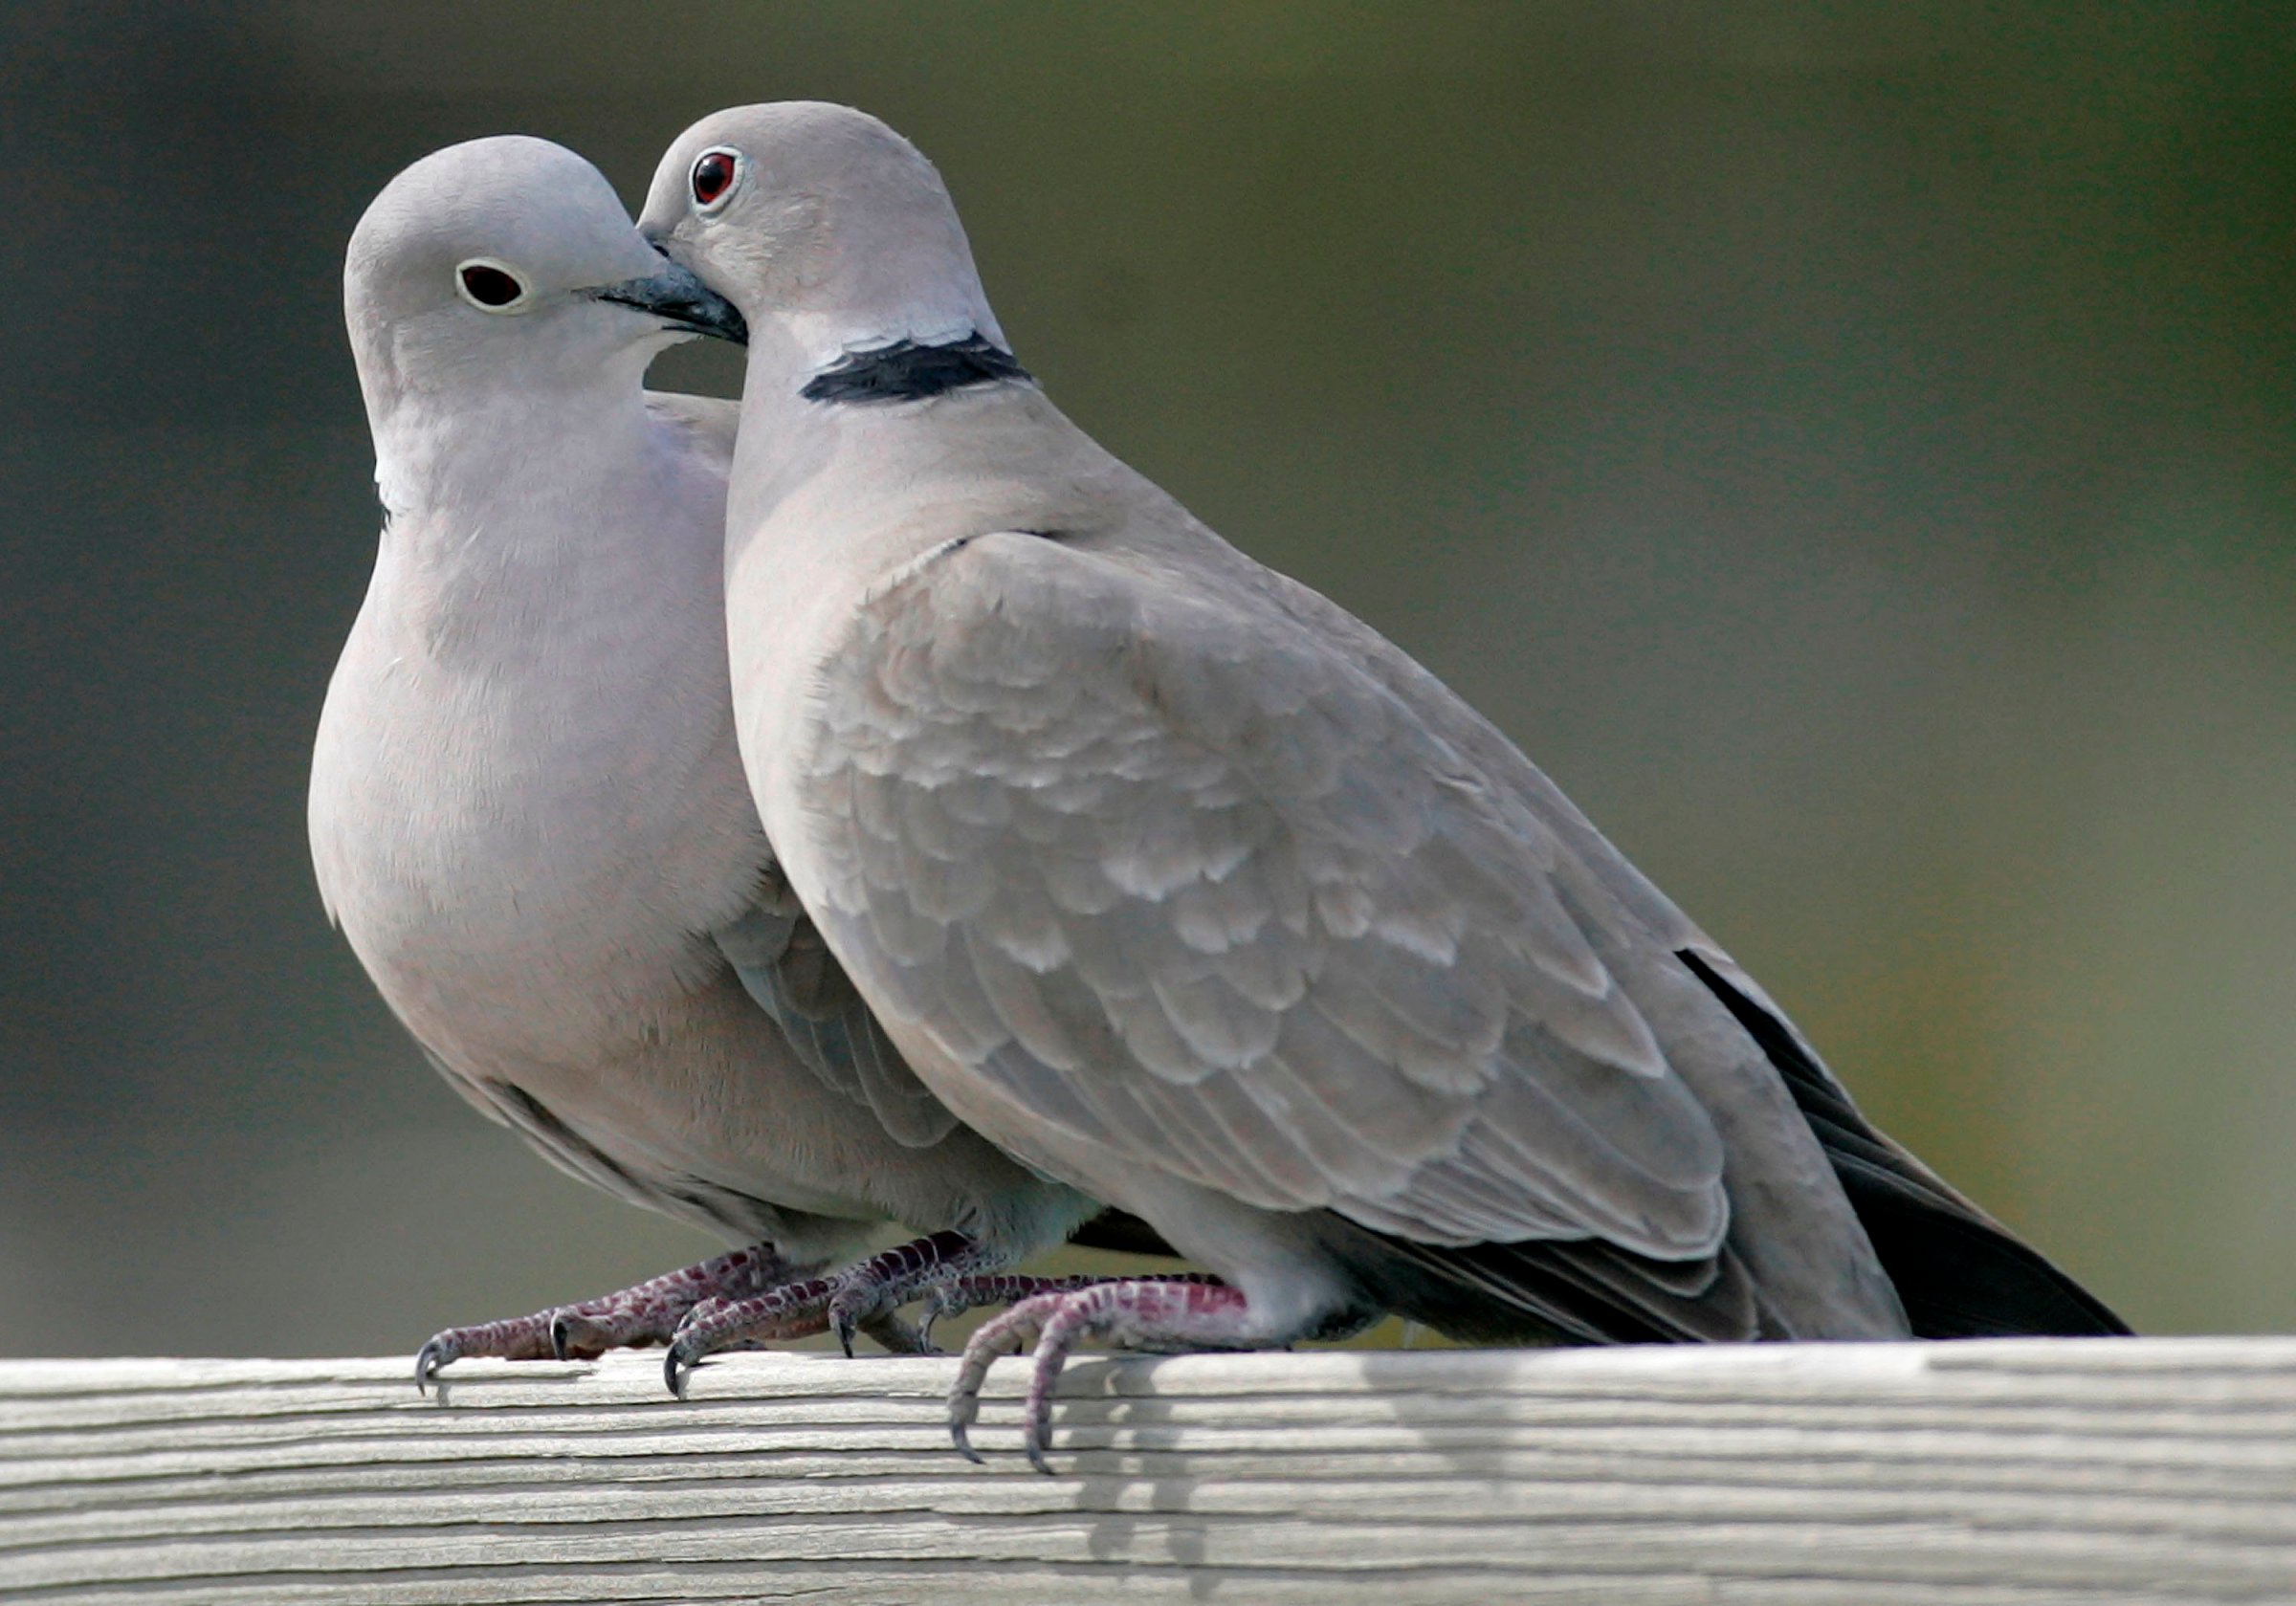 This photo shows two turtle doves in St. George Island, Fla. on Feb. 12, 2009.